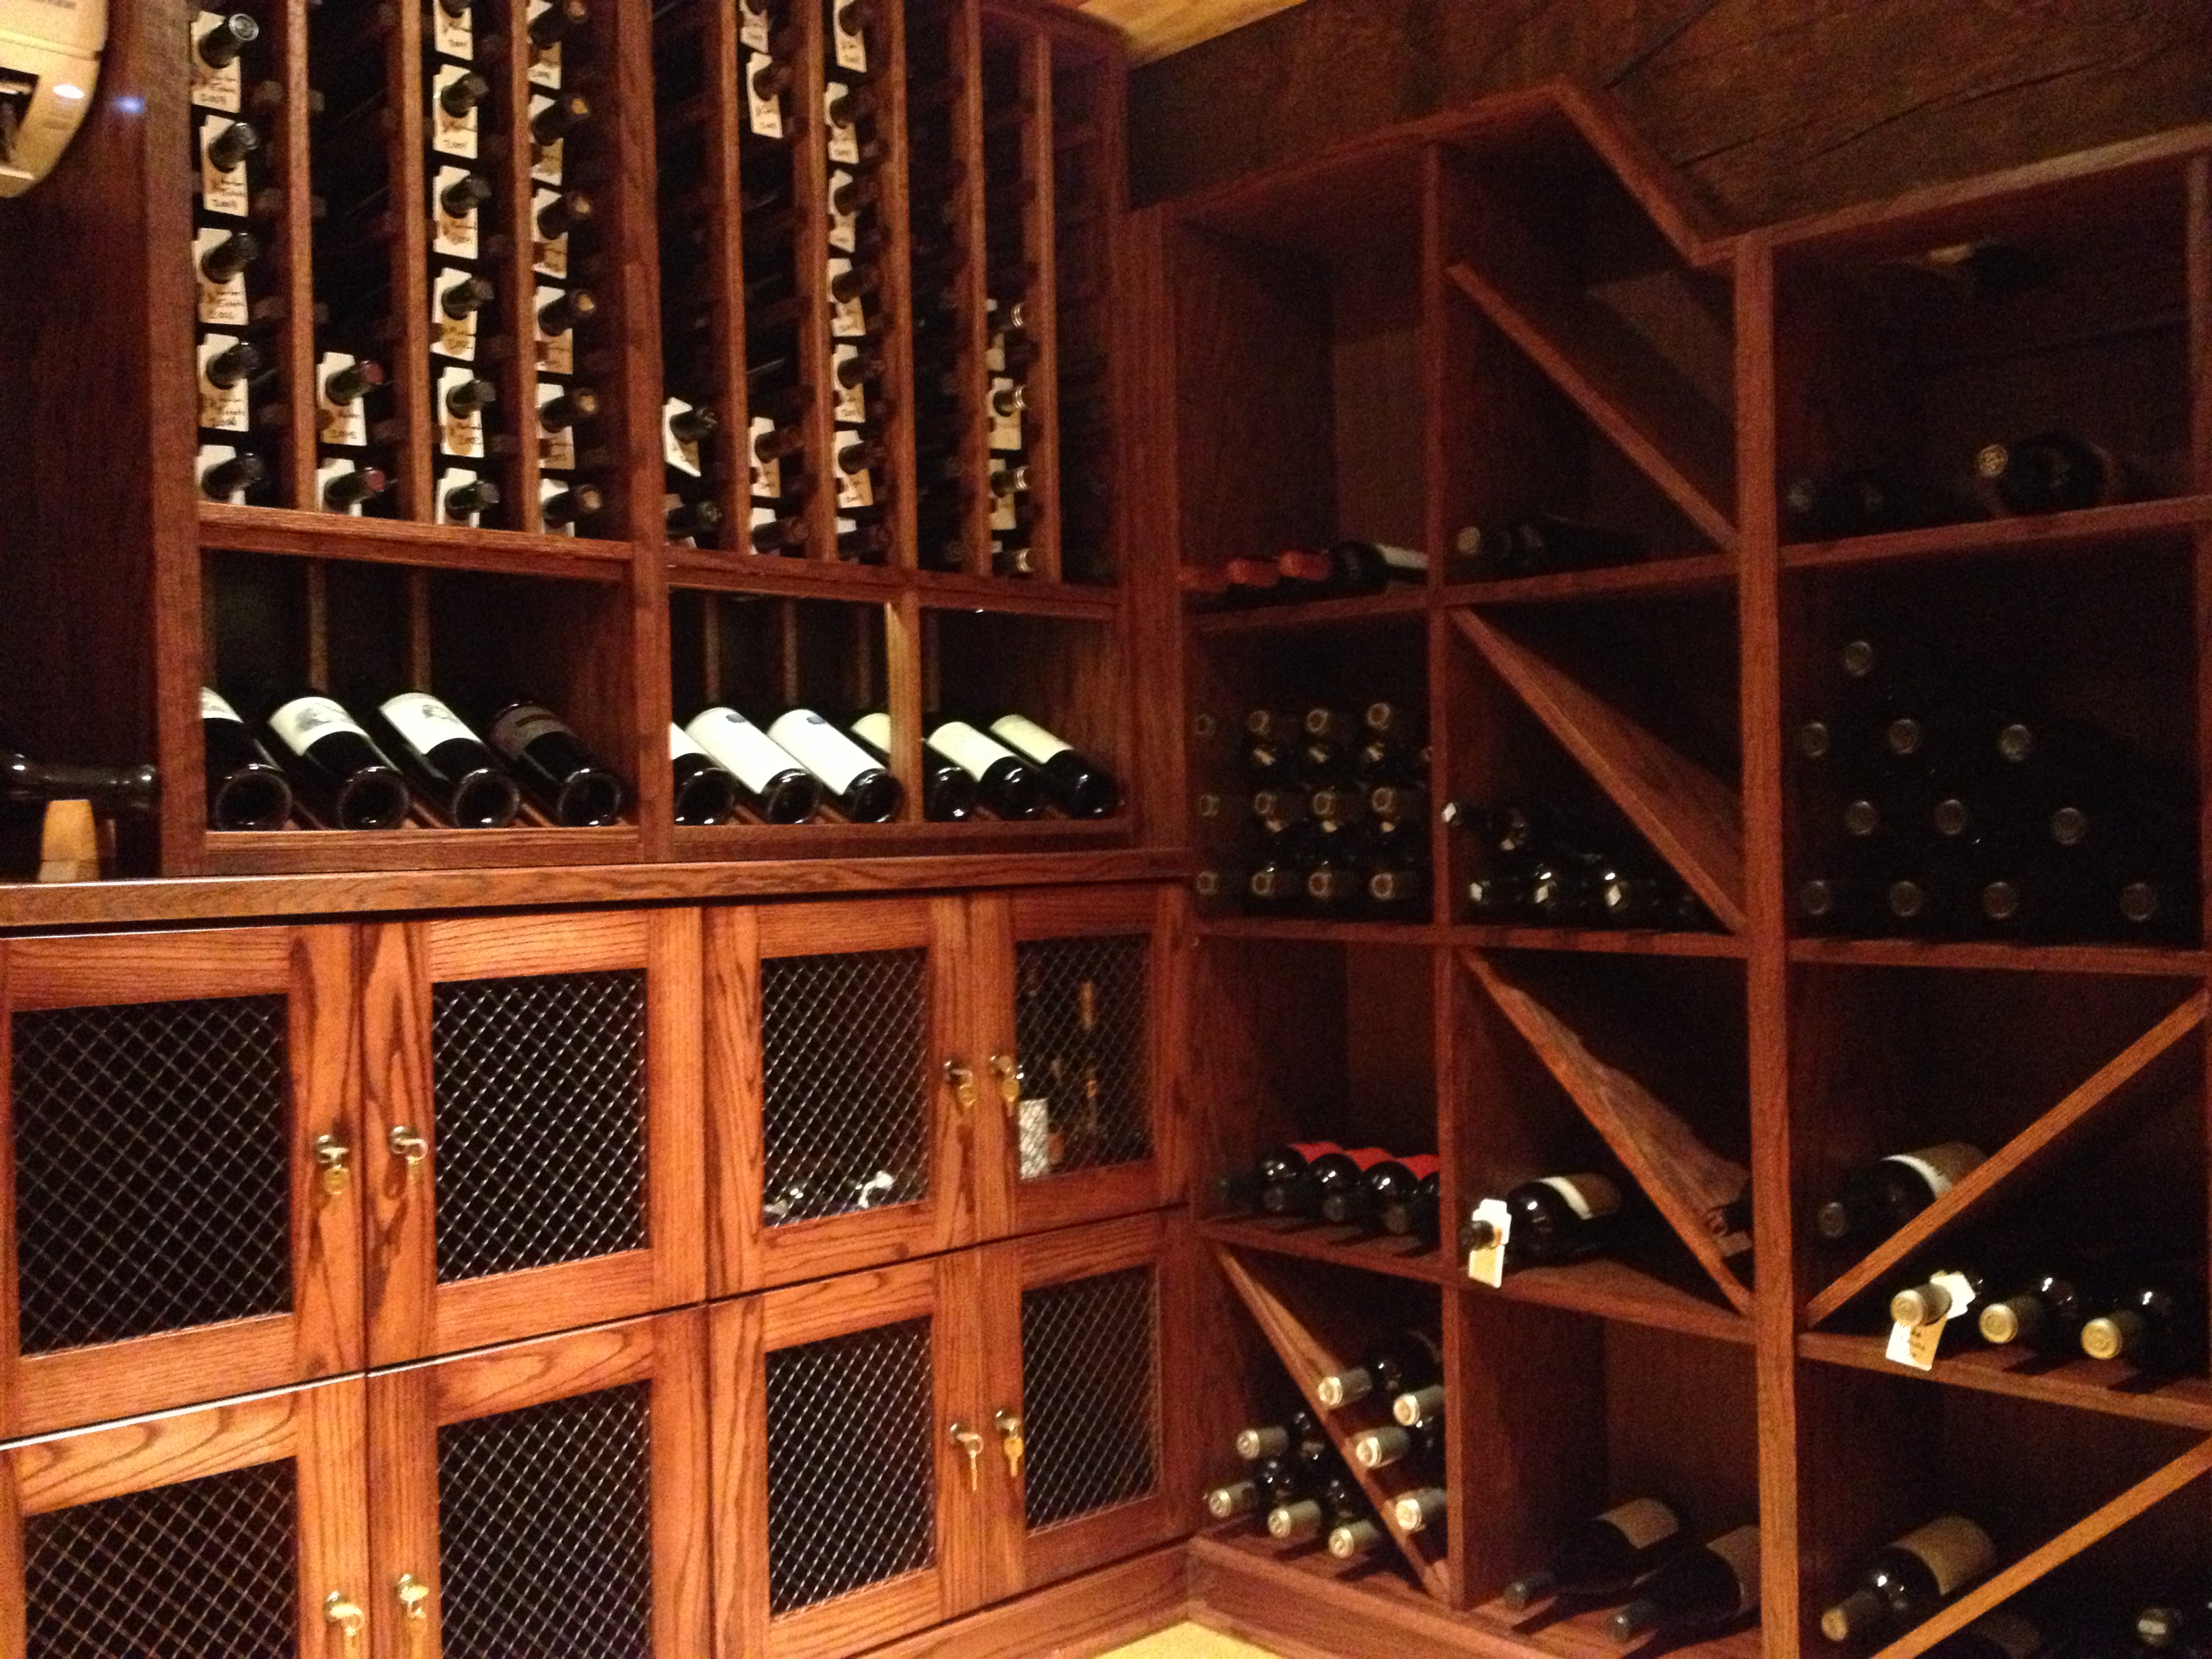 Kessick Wine Cellars Designs and Manufacturers a Stunning Wine Cellar